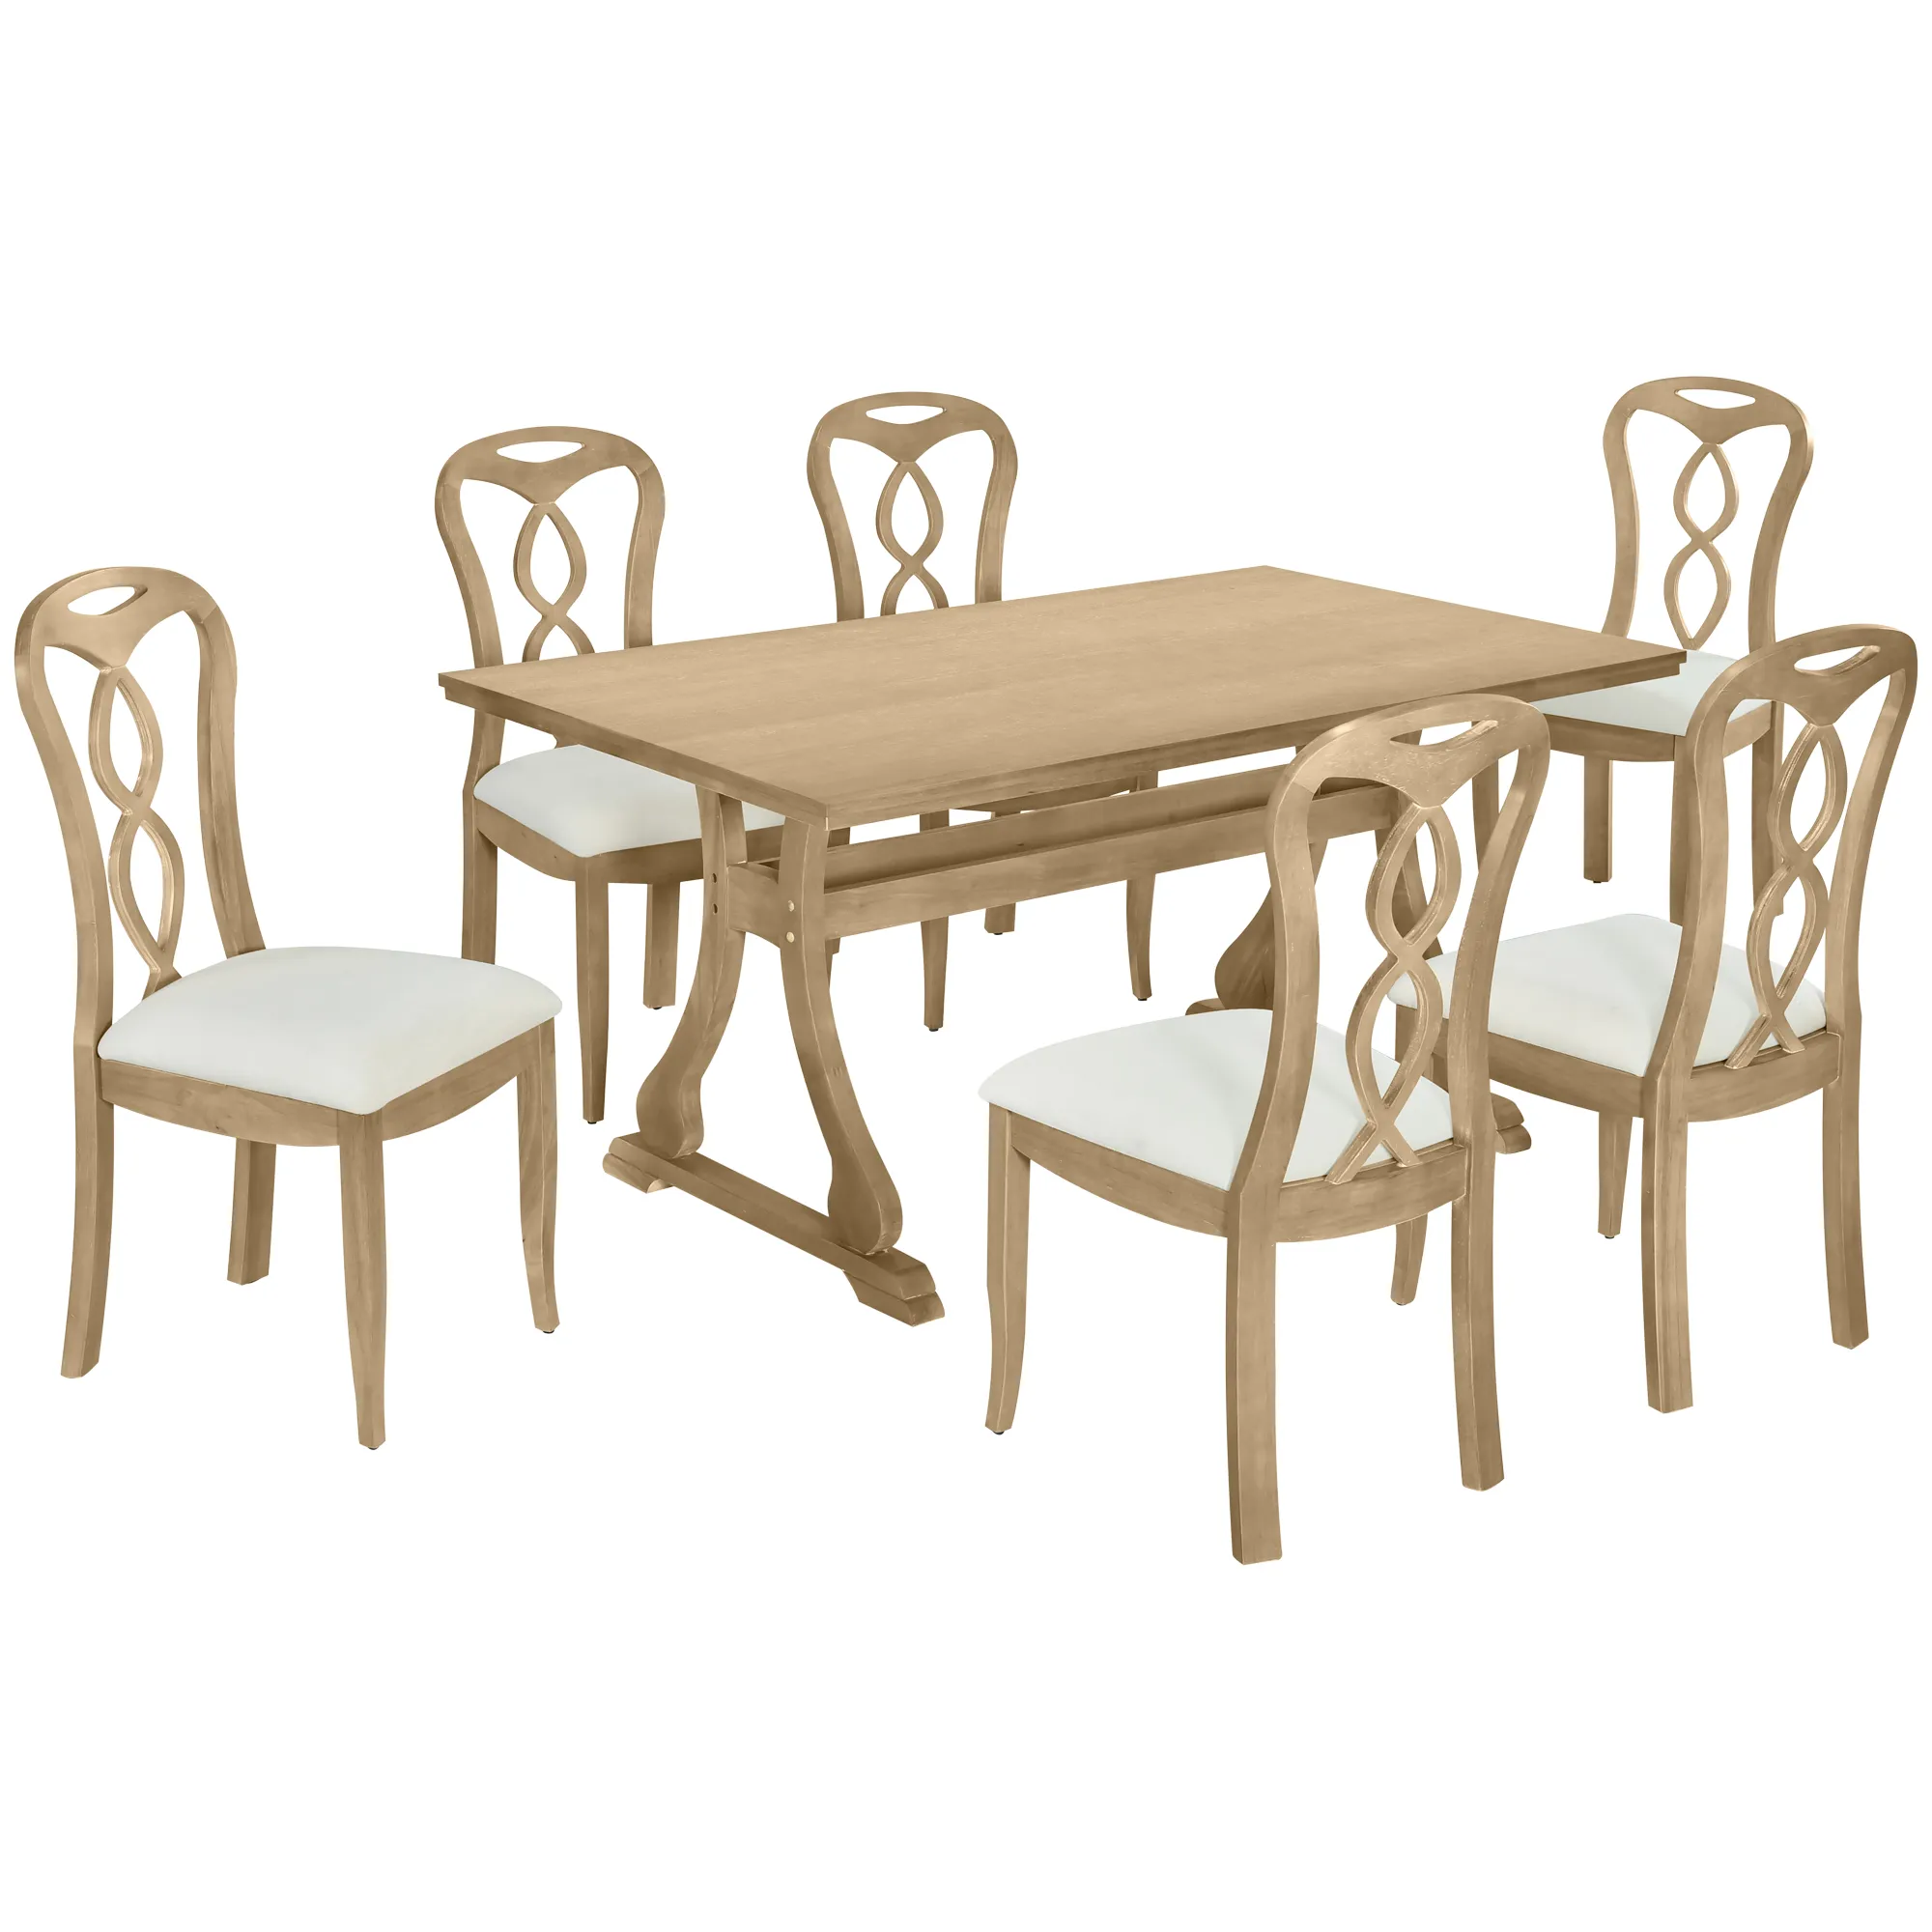 Merax Retro Table with Chairs and Bench Dining Set